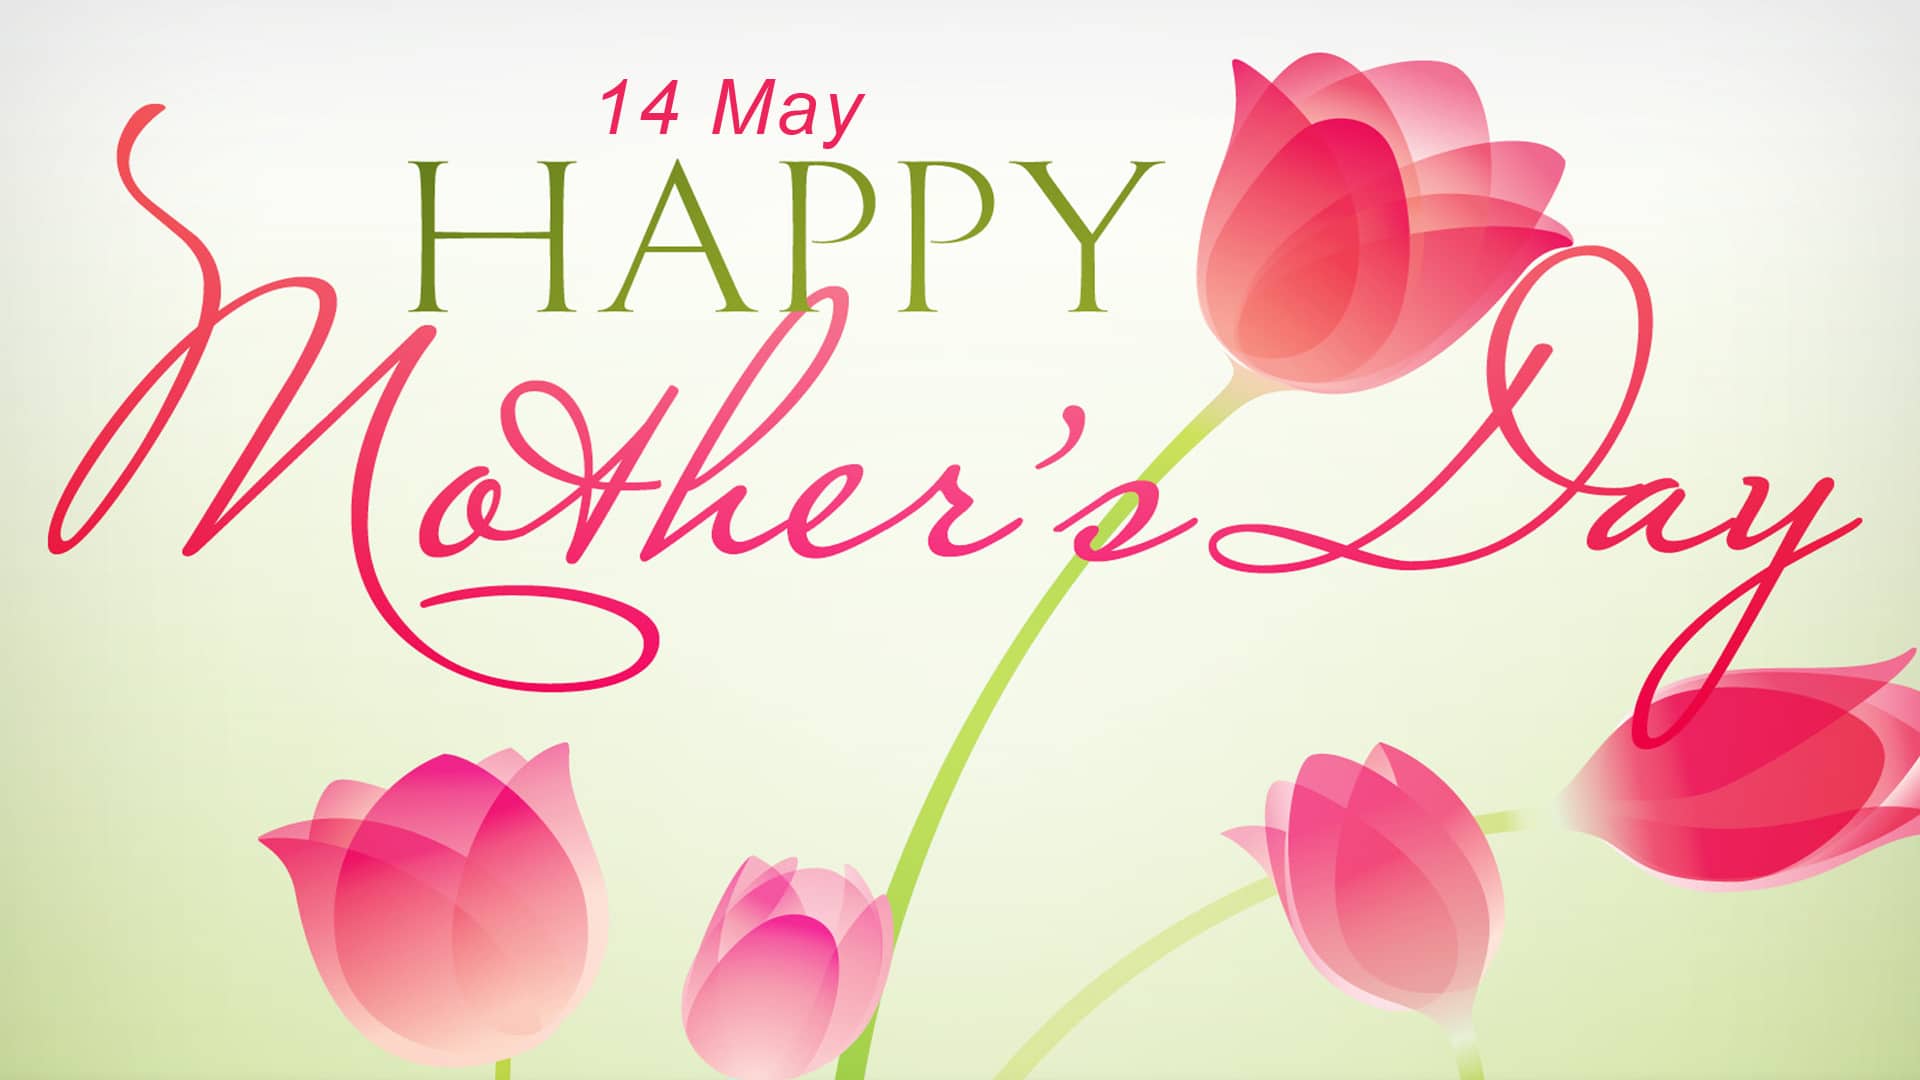 When is Mother's Day in Ireland